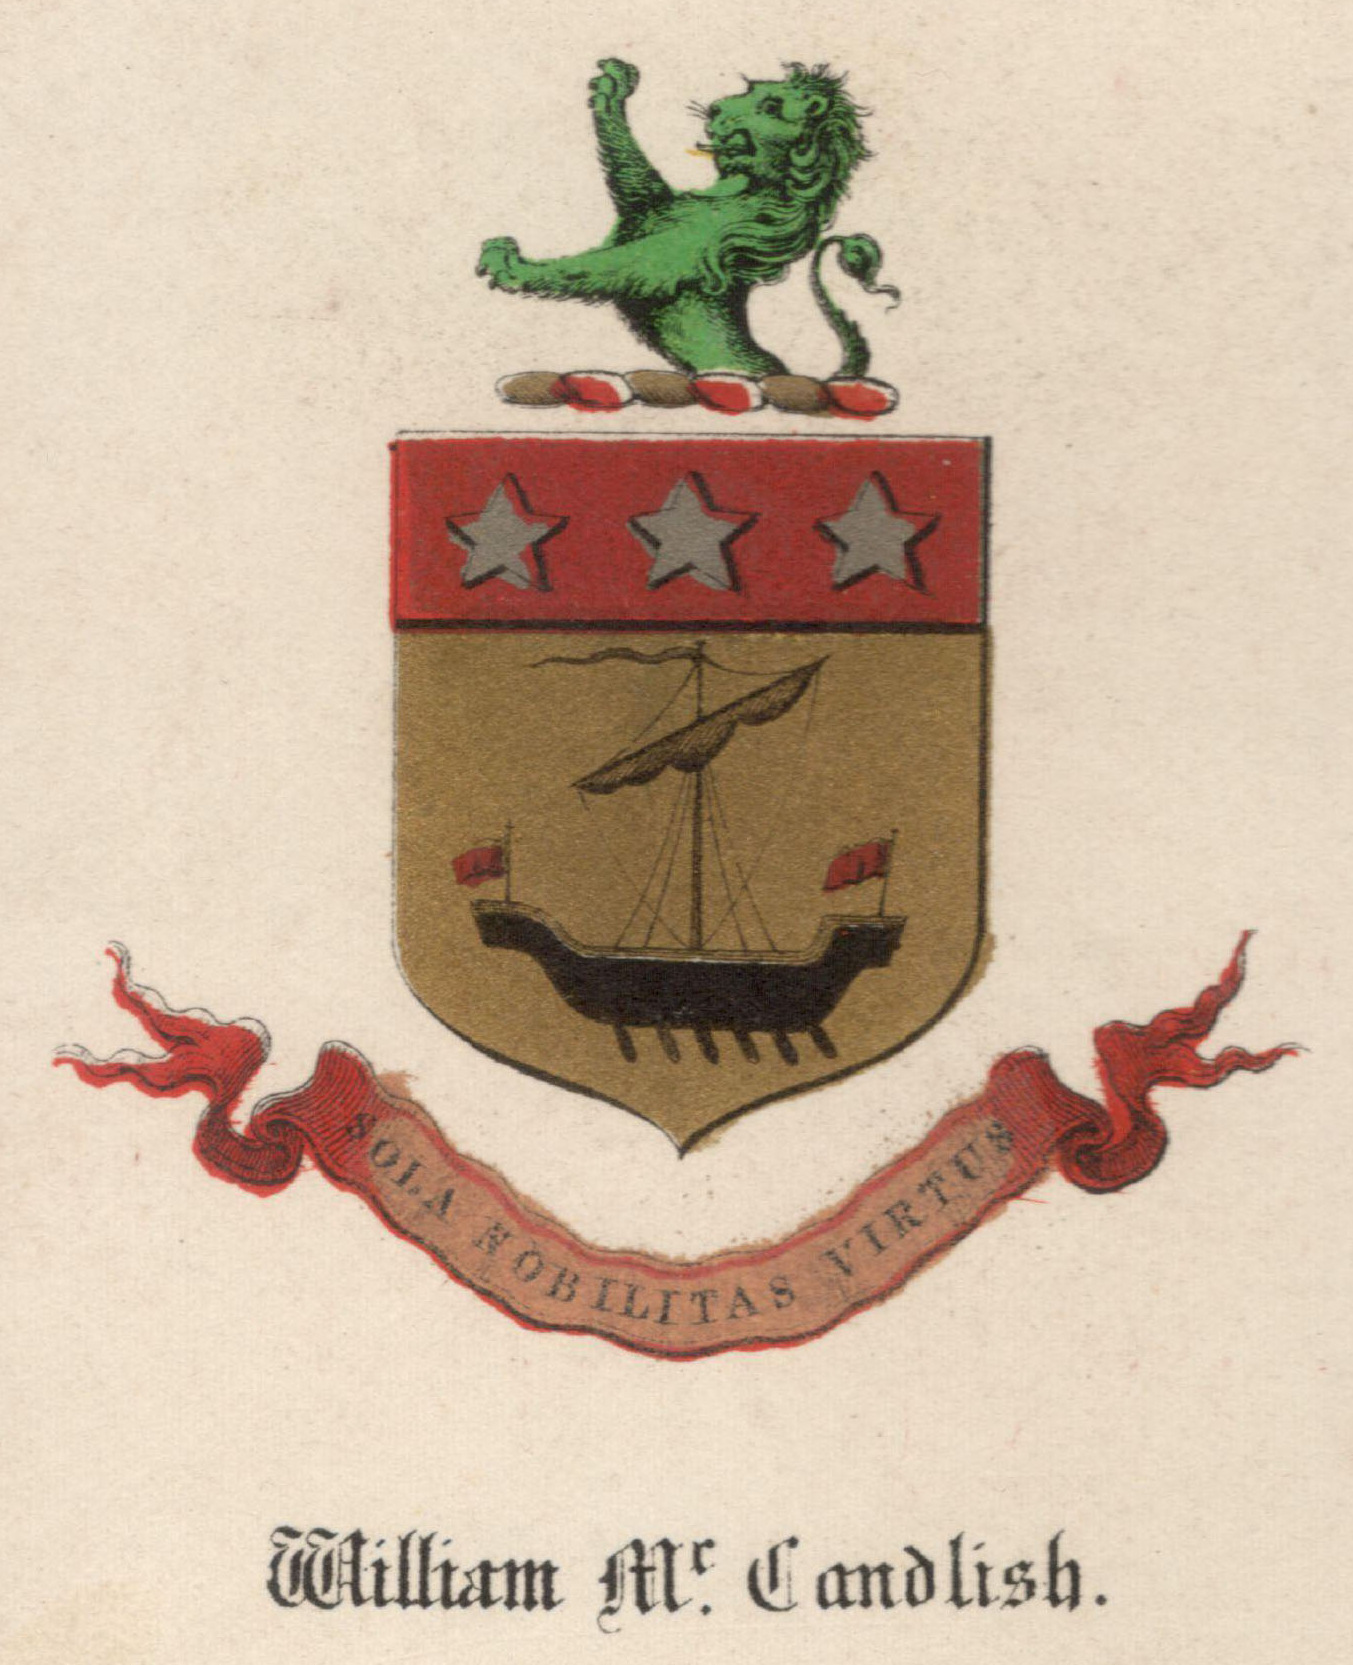 [Image: William McCandlish antique colour bookplate with motto, coat of arms, and crest]